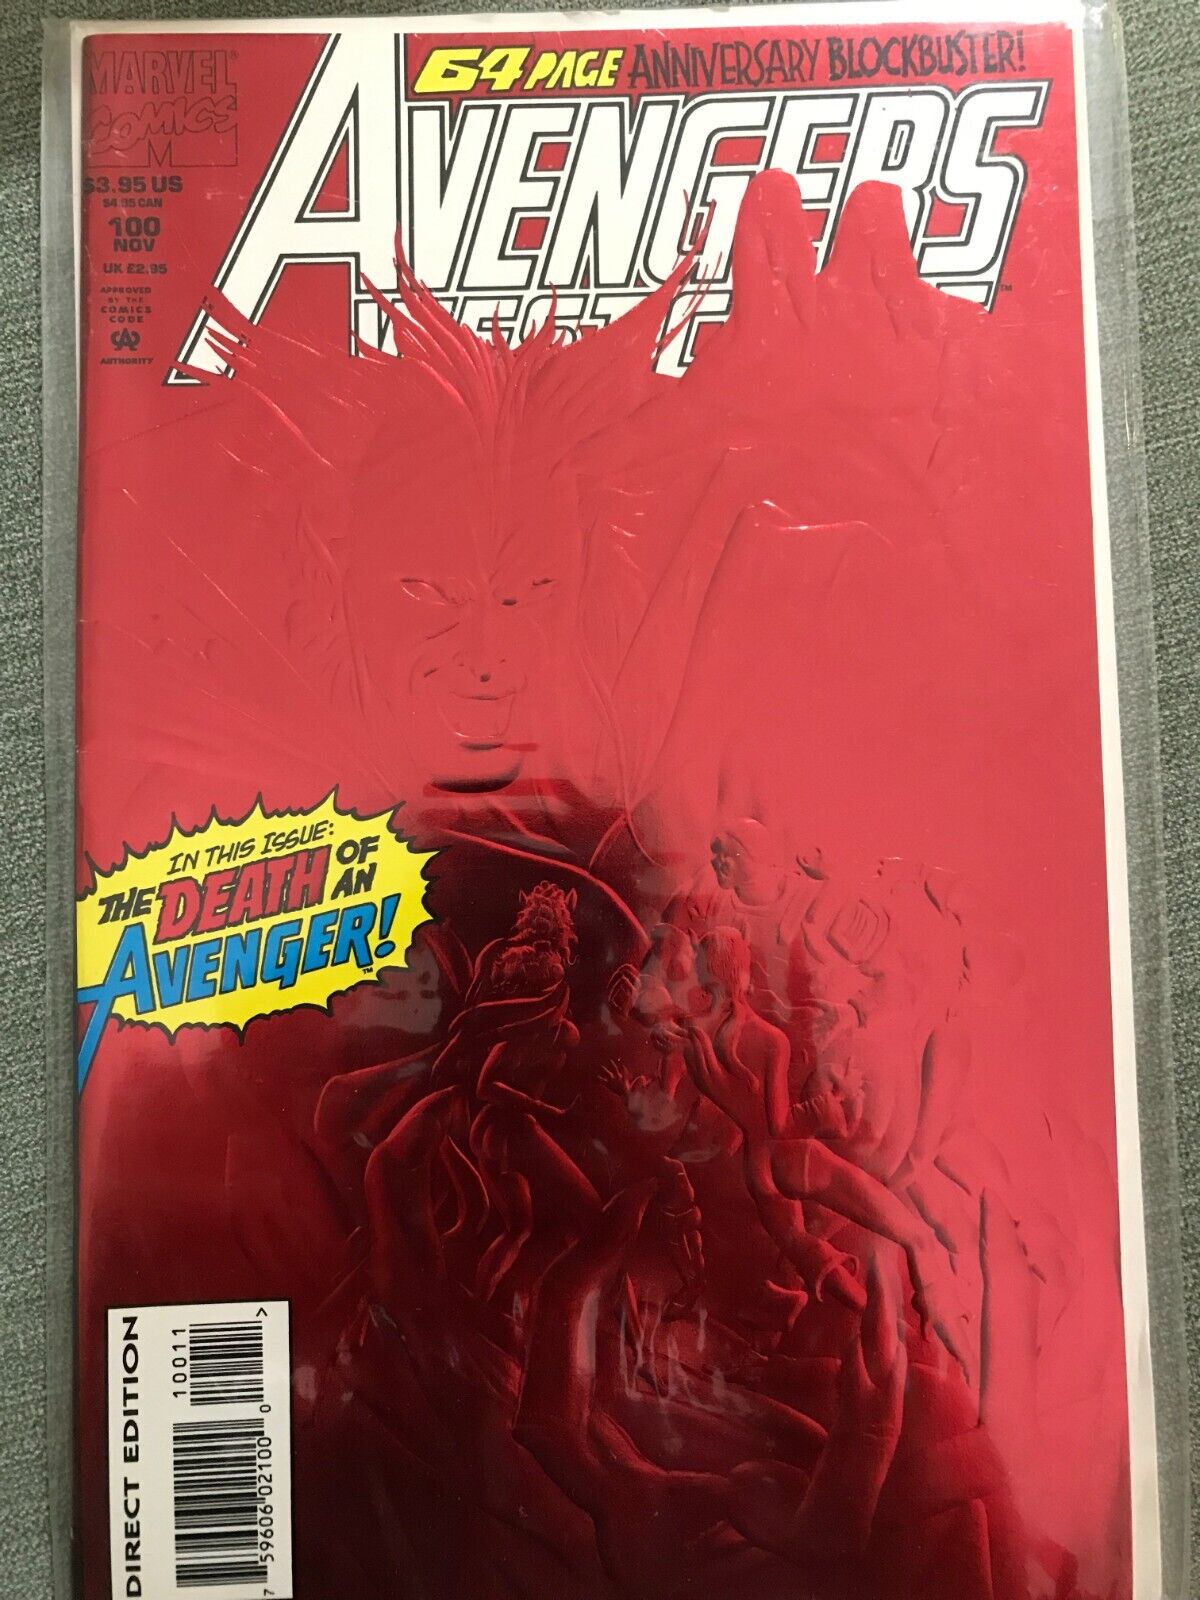 Avengers 64-page Anniversary